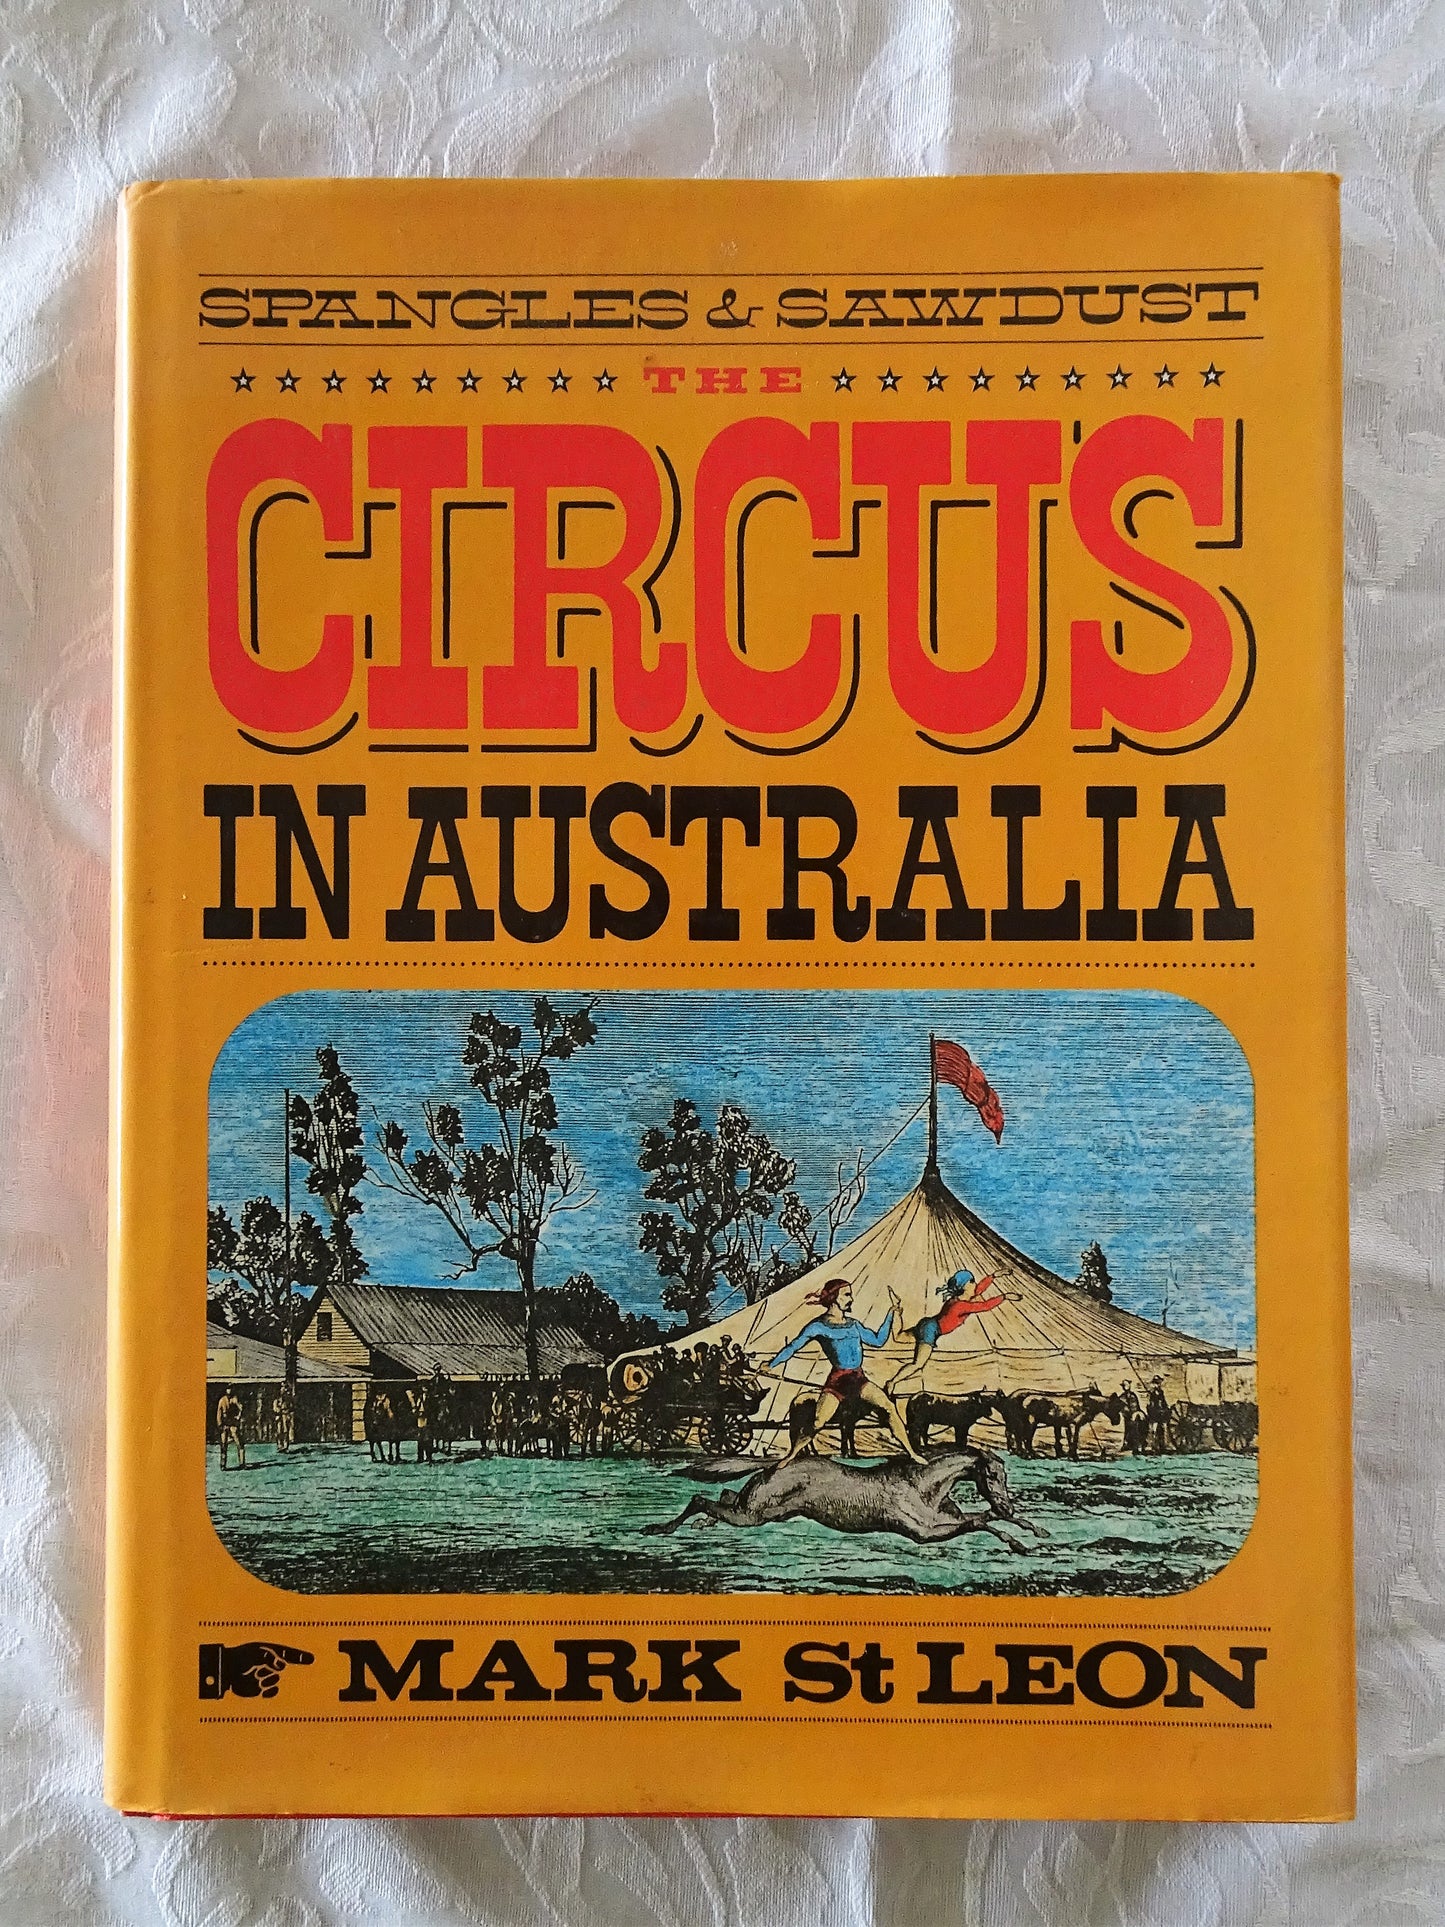 The Circus in Australia by Mark St Leon